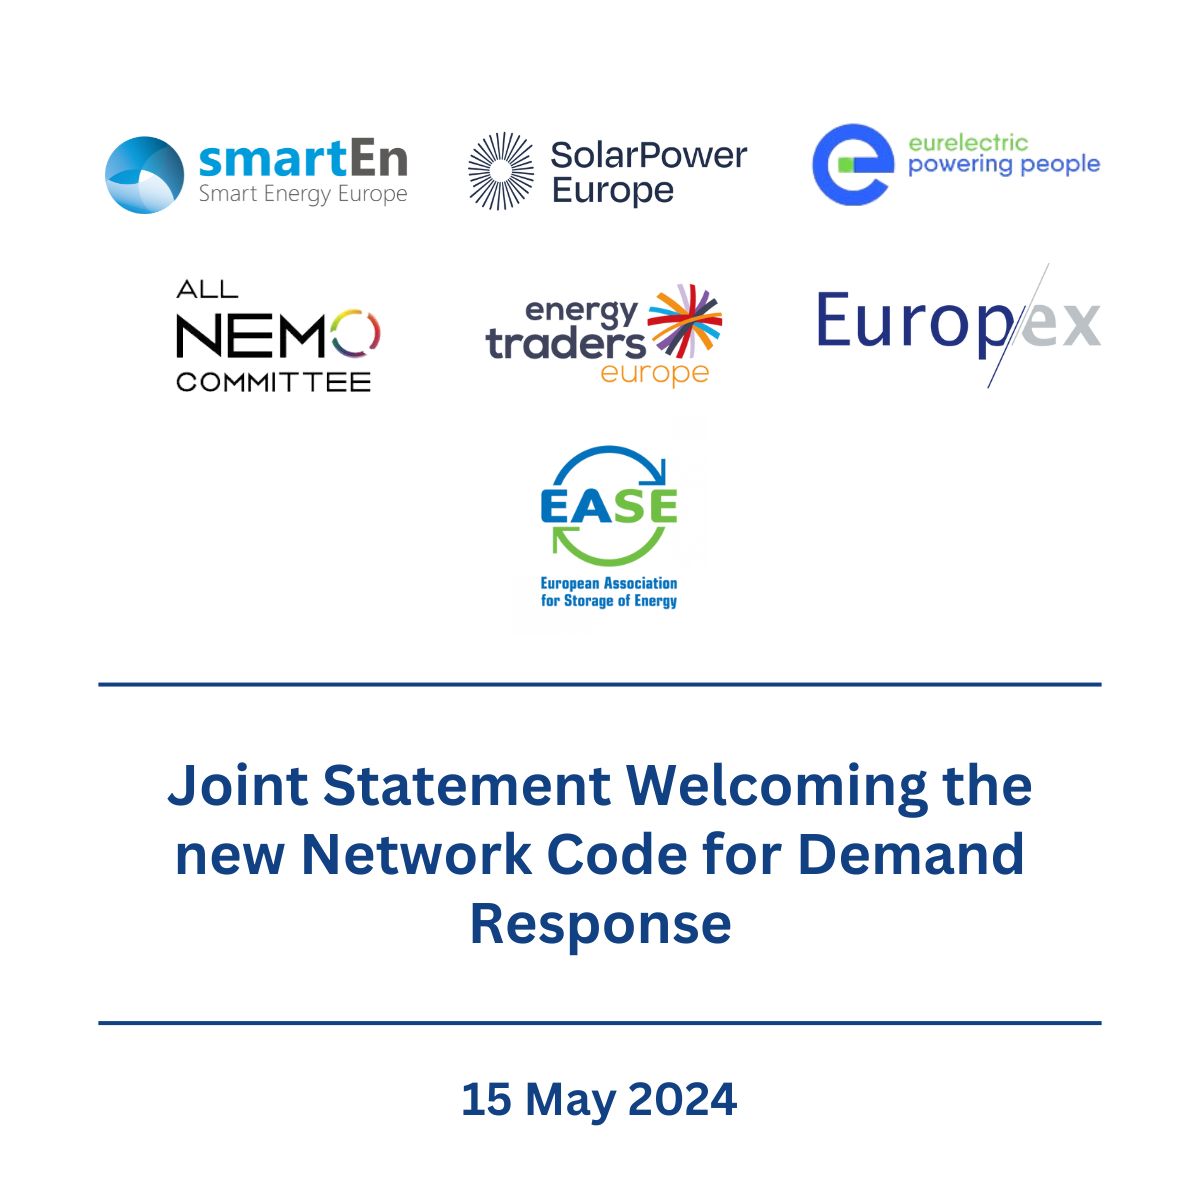 Together with @Eurelectric, @Europex_energy, @EASE_ES, @smartEnEU, All NEMO Committee & Energy Traders Europe, we welcome the new #DemandResponse #NetworkCode drafted by
@ENTSO_E & @DSOEntity_eu!

🔗solarpowereurope.org/advocacy/polic…